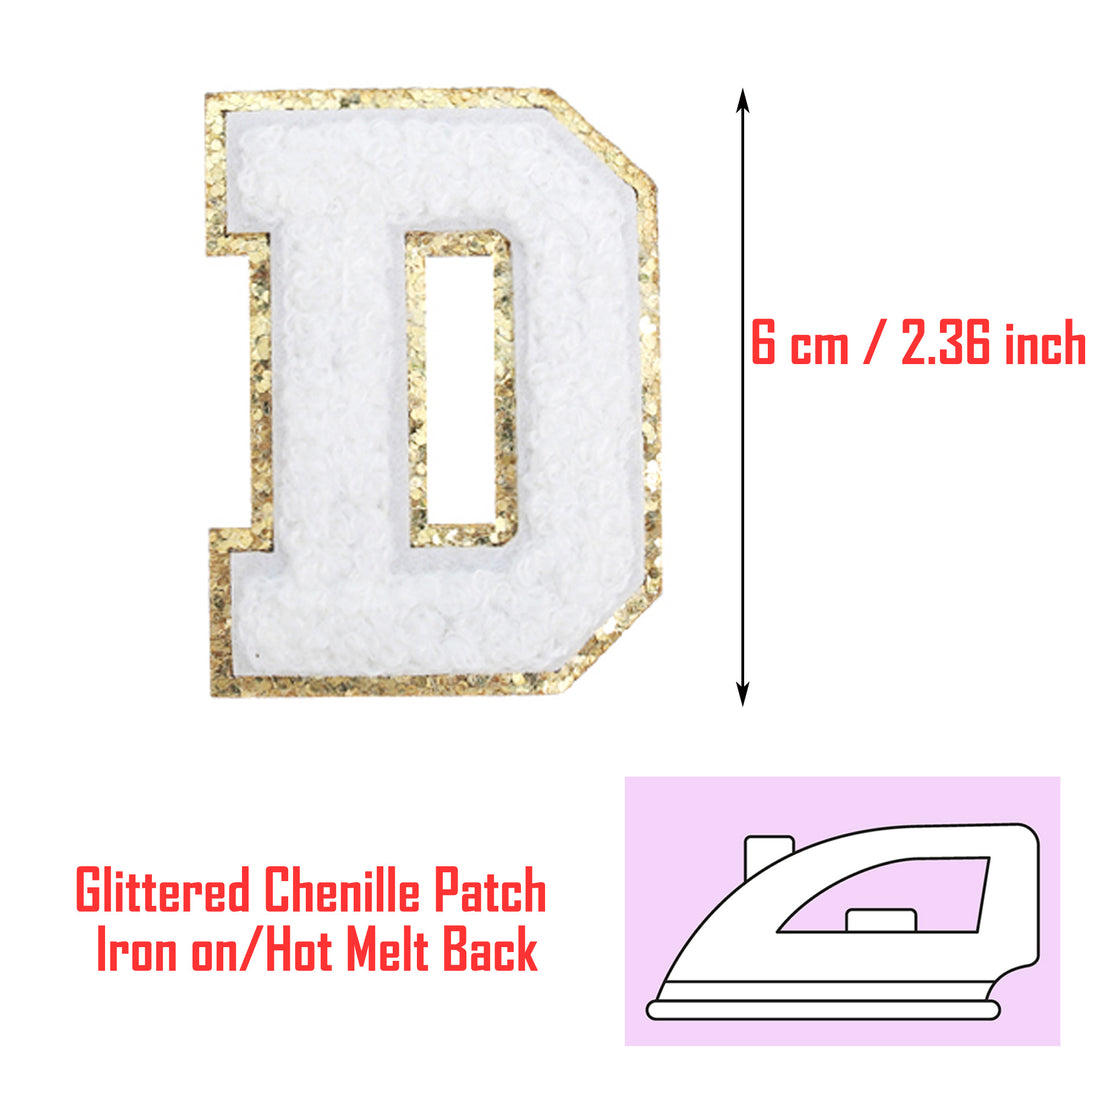 26PCS White Iron-on Chenille Letter Patches for Clothing, Jackets, Backpacks - Alphabet Applique Iron on Repair Patches